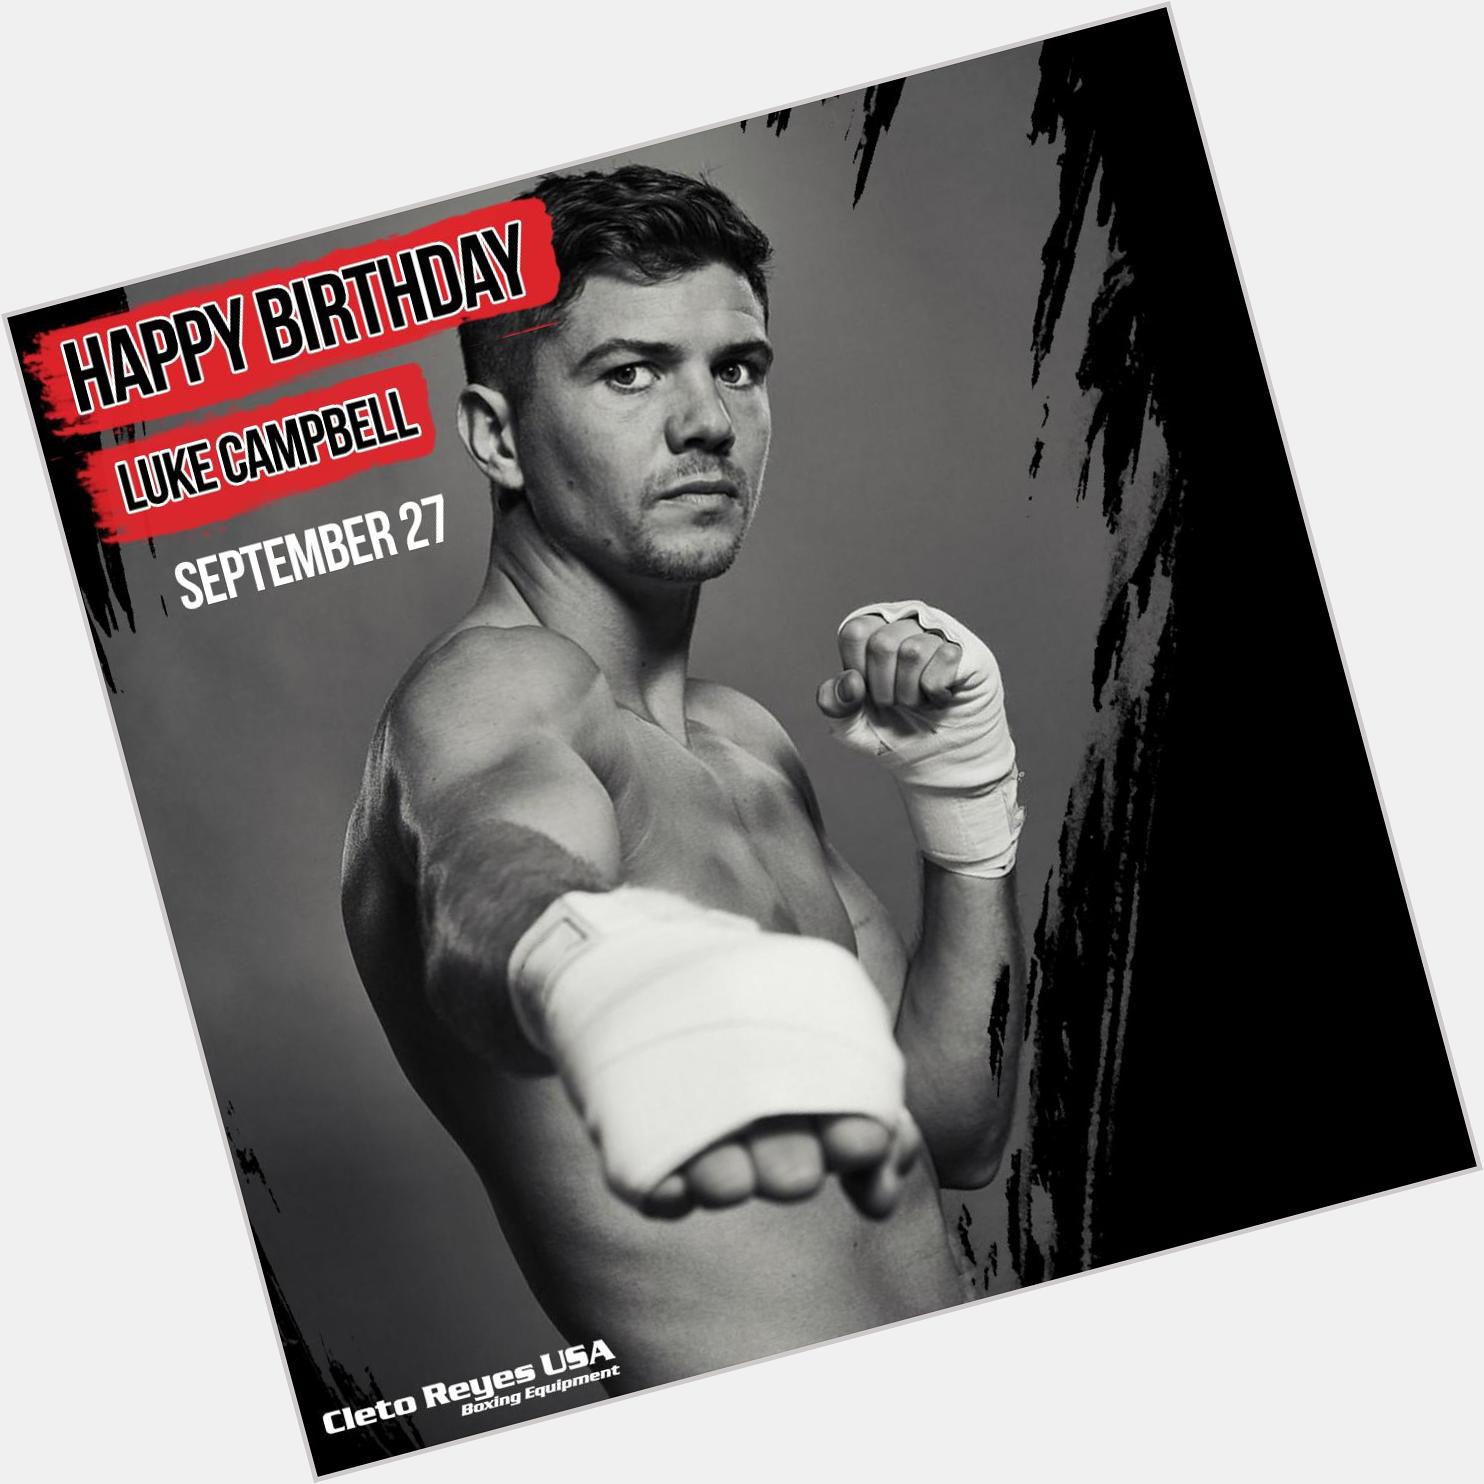 Happy Birthday Luke Campbell Official best wishes from the Cleto Reyes Team! 